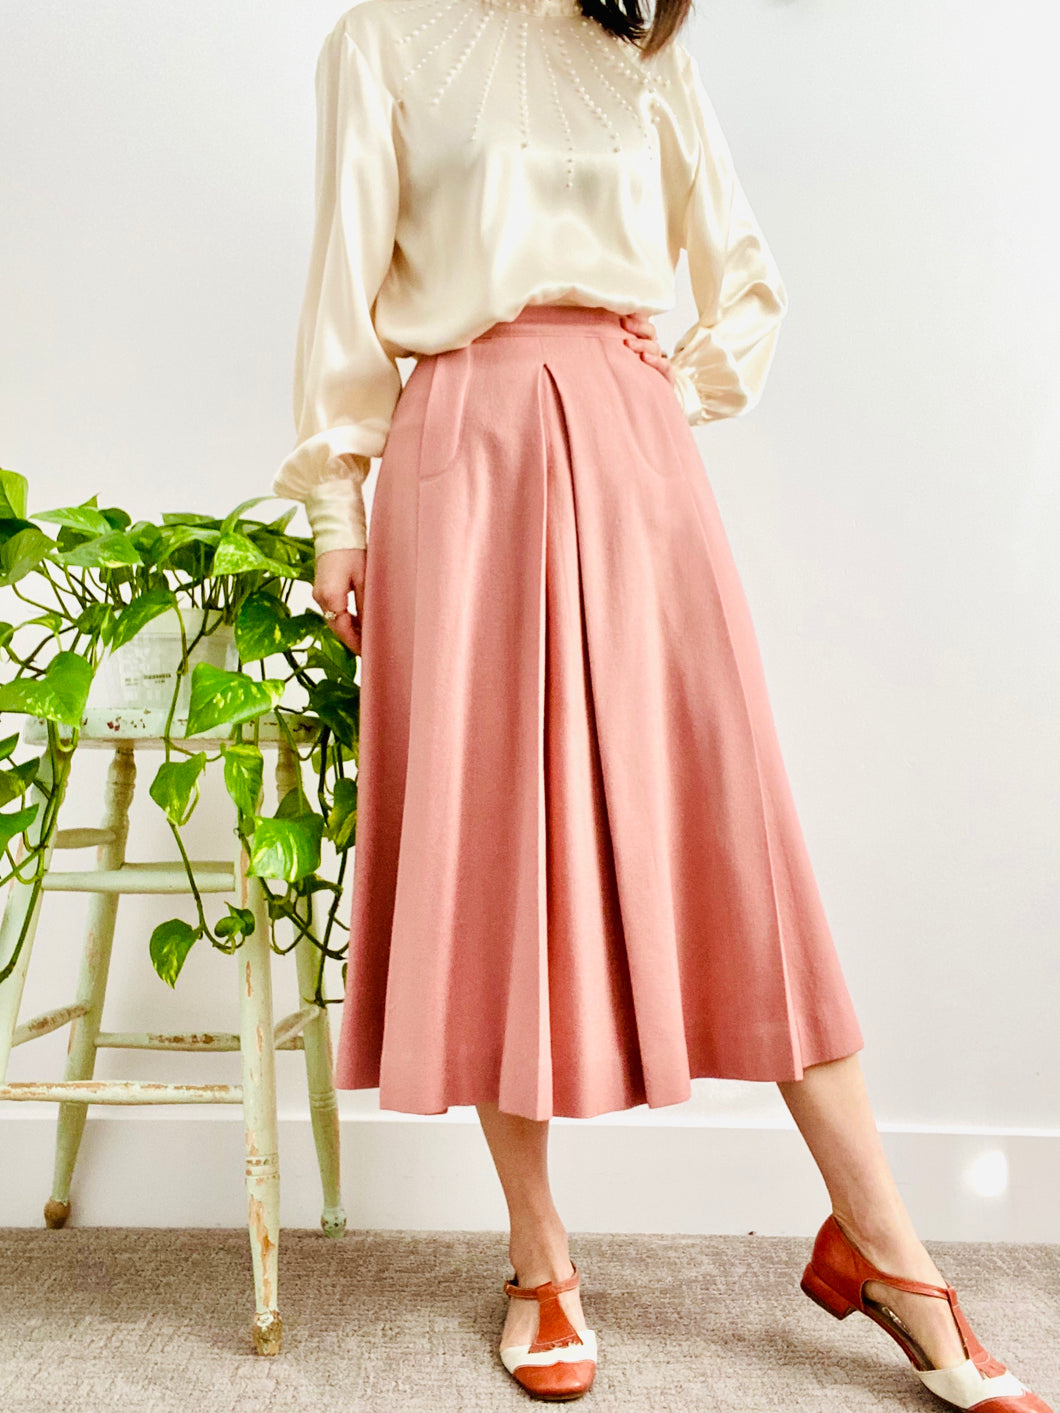 Vintage 1970s High Waisted Dusty Pink A Line Wool Skirt